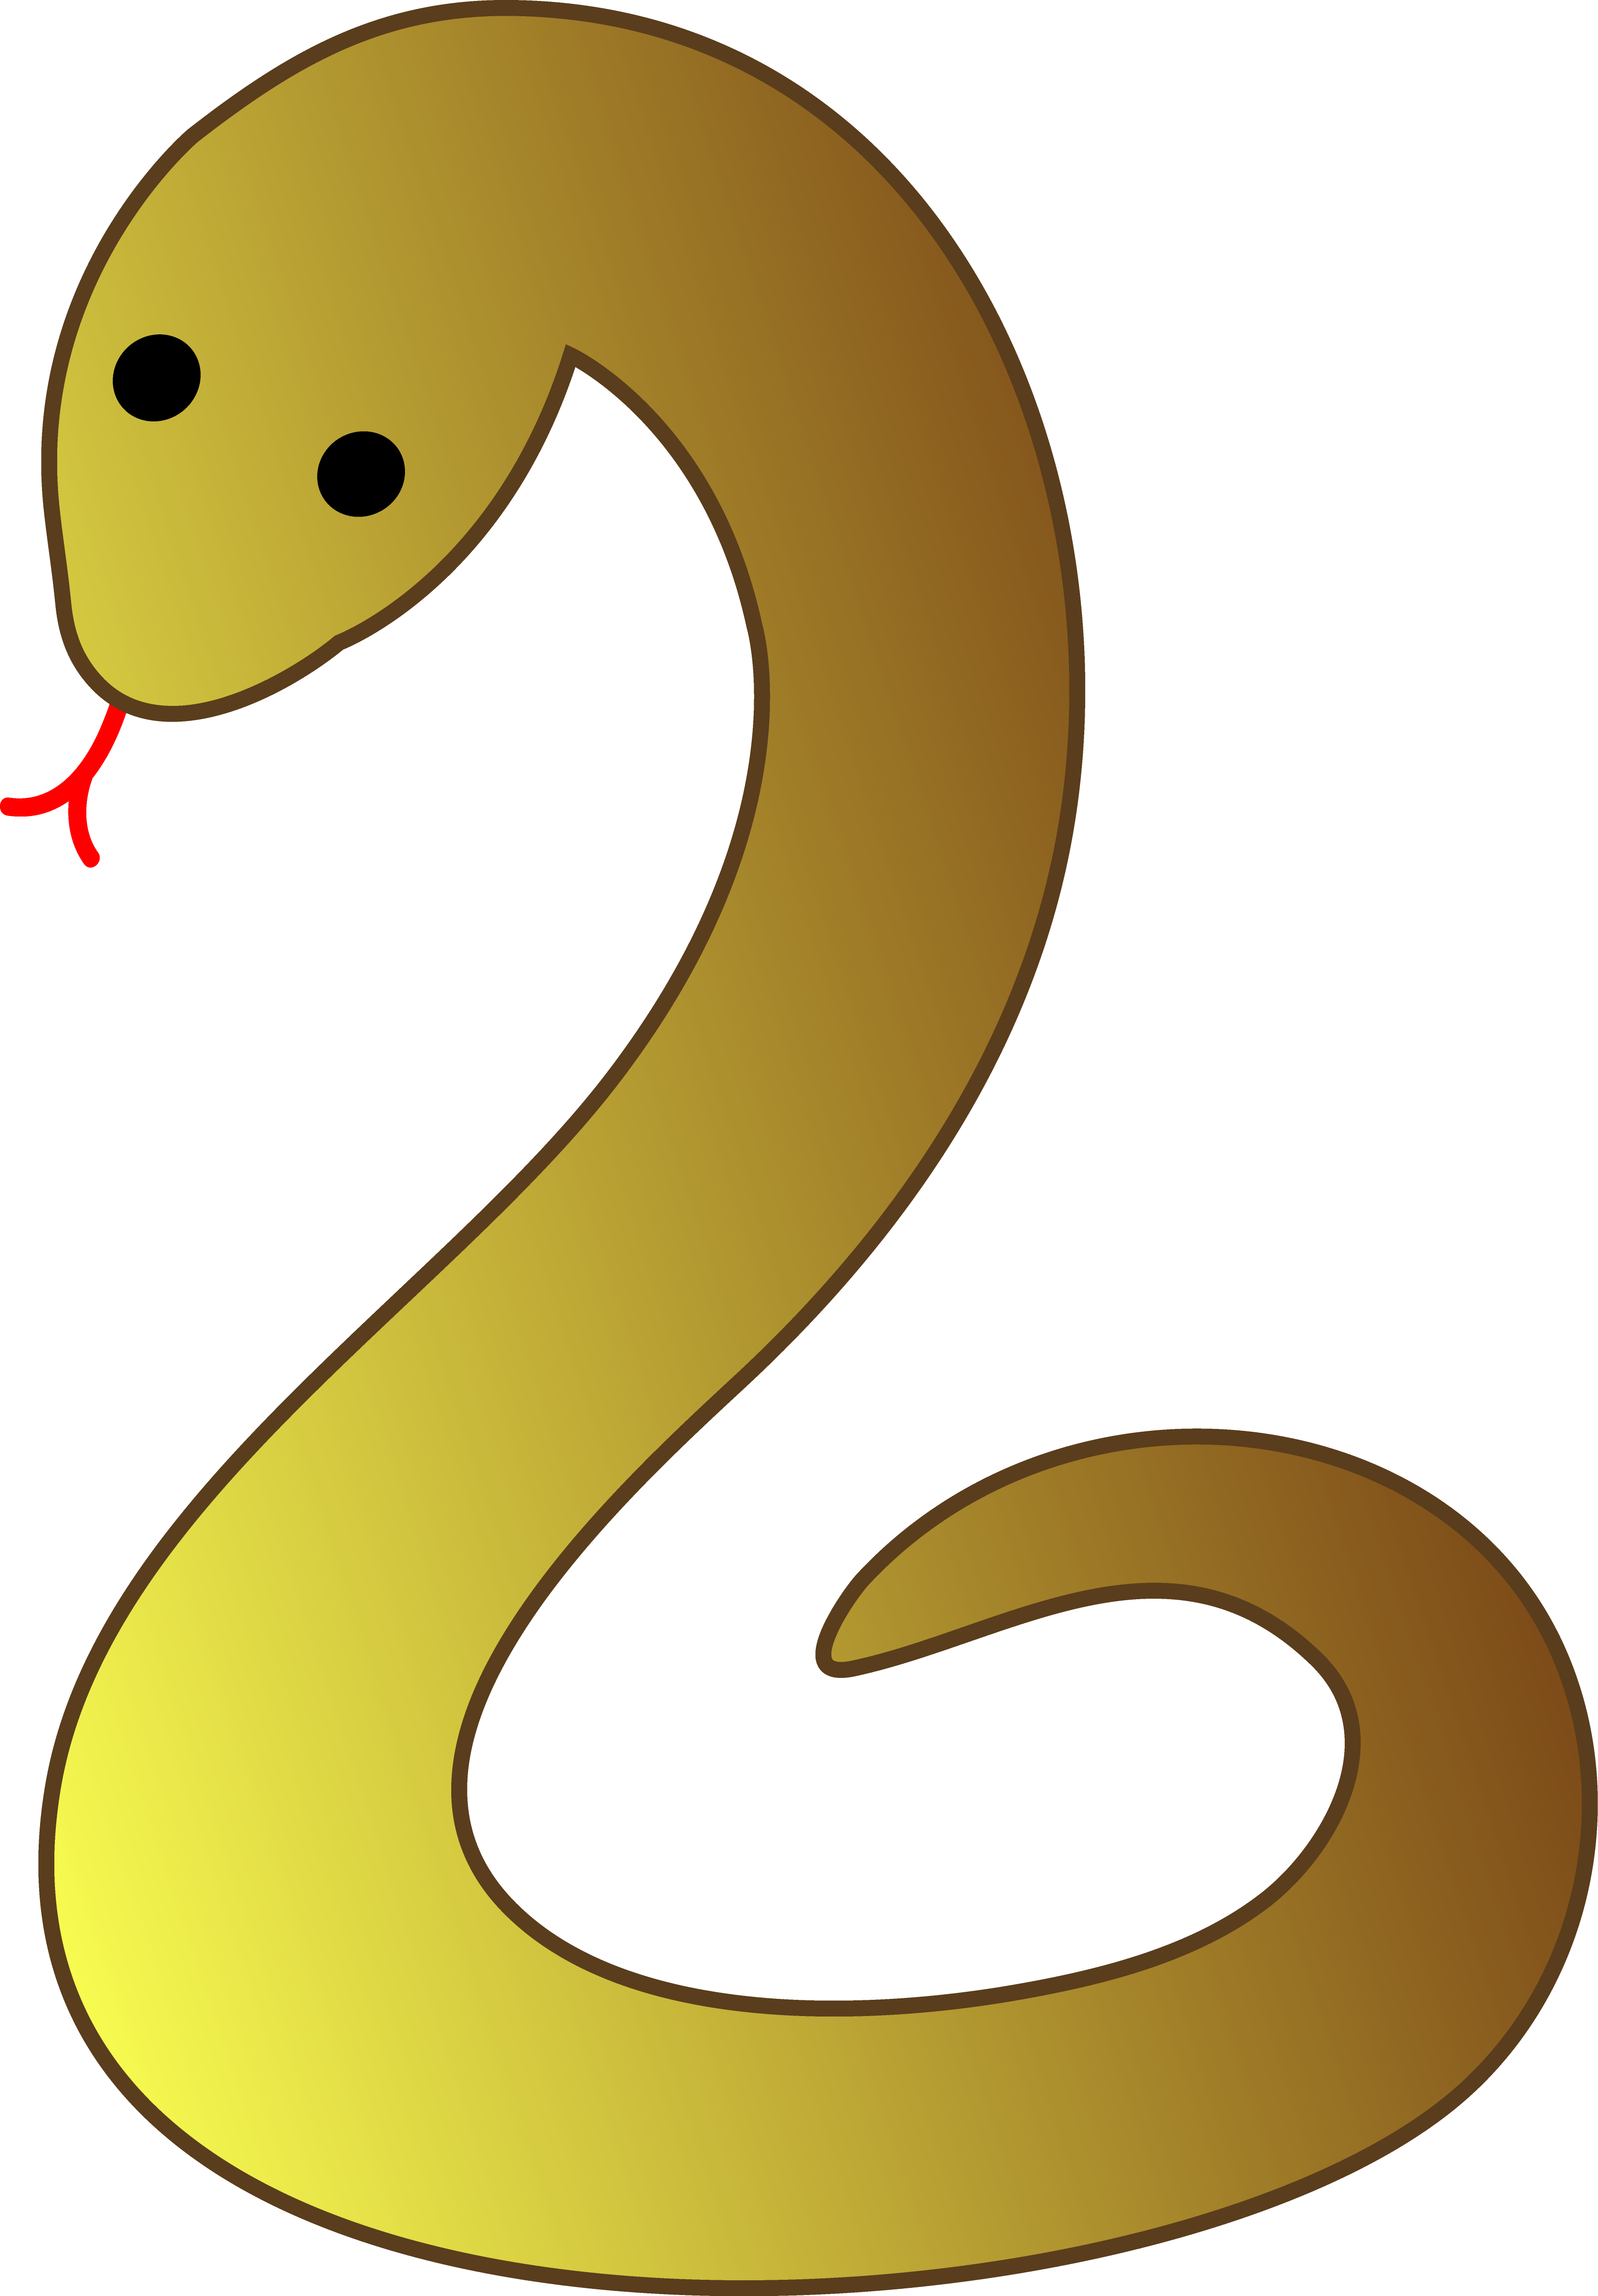 Snake Clipart Black And White | Clipart Panda - Free Clipart Images